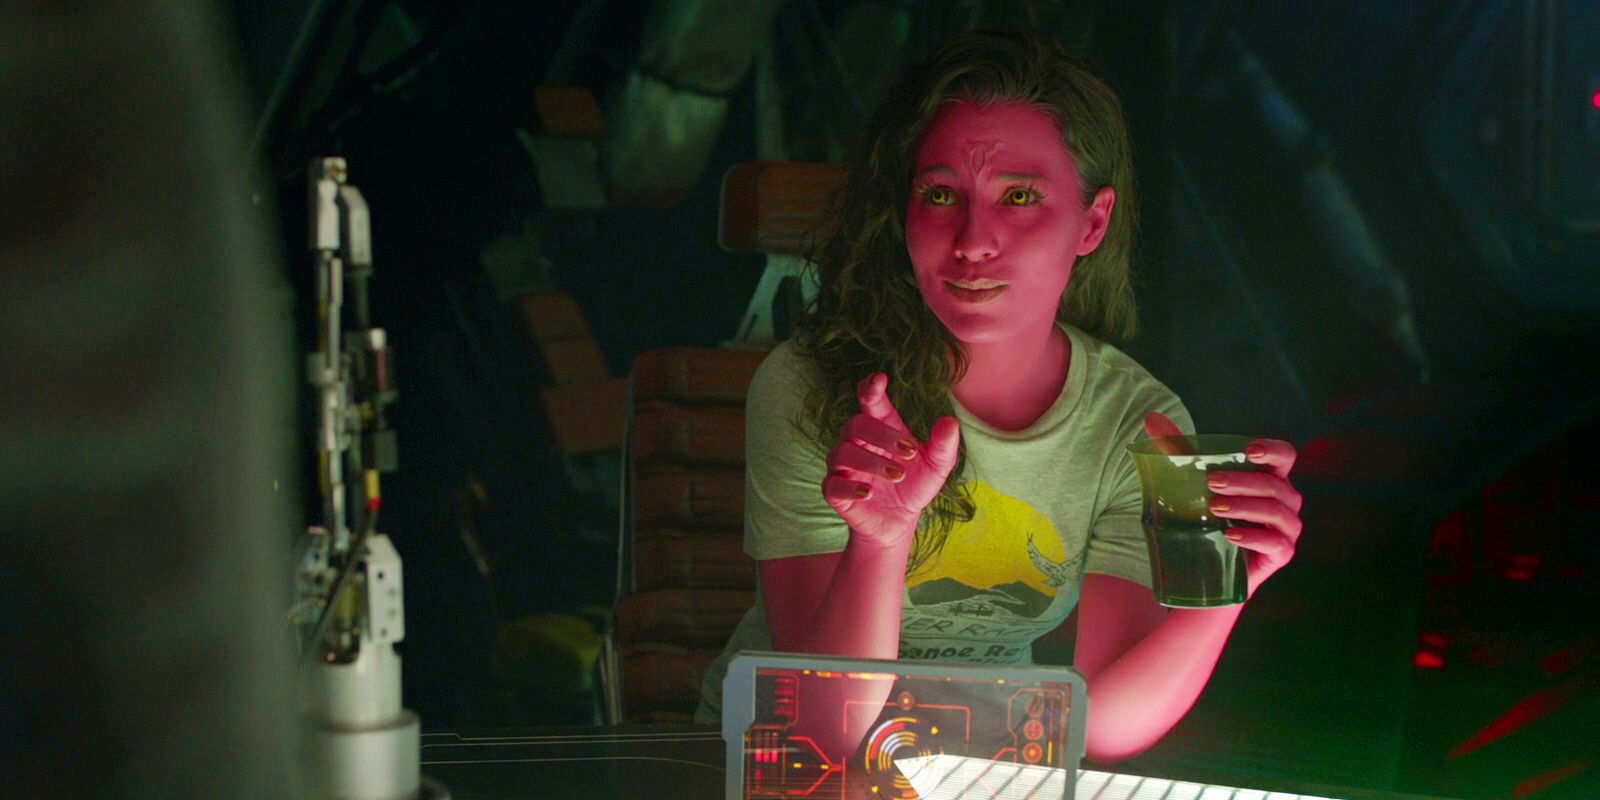 Bereet was a fairly minor character in Guardians of the Galaxy